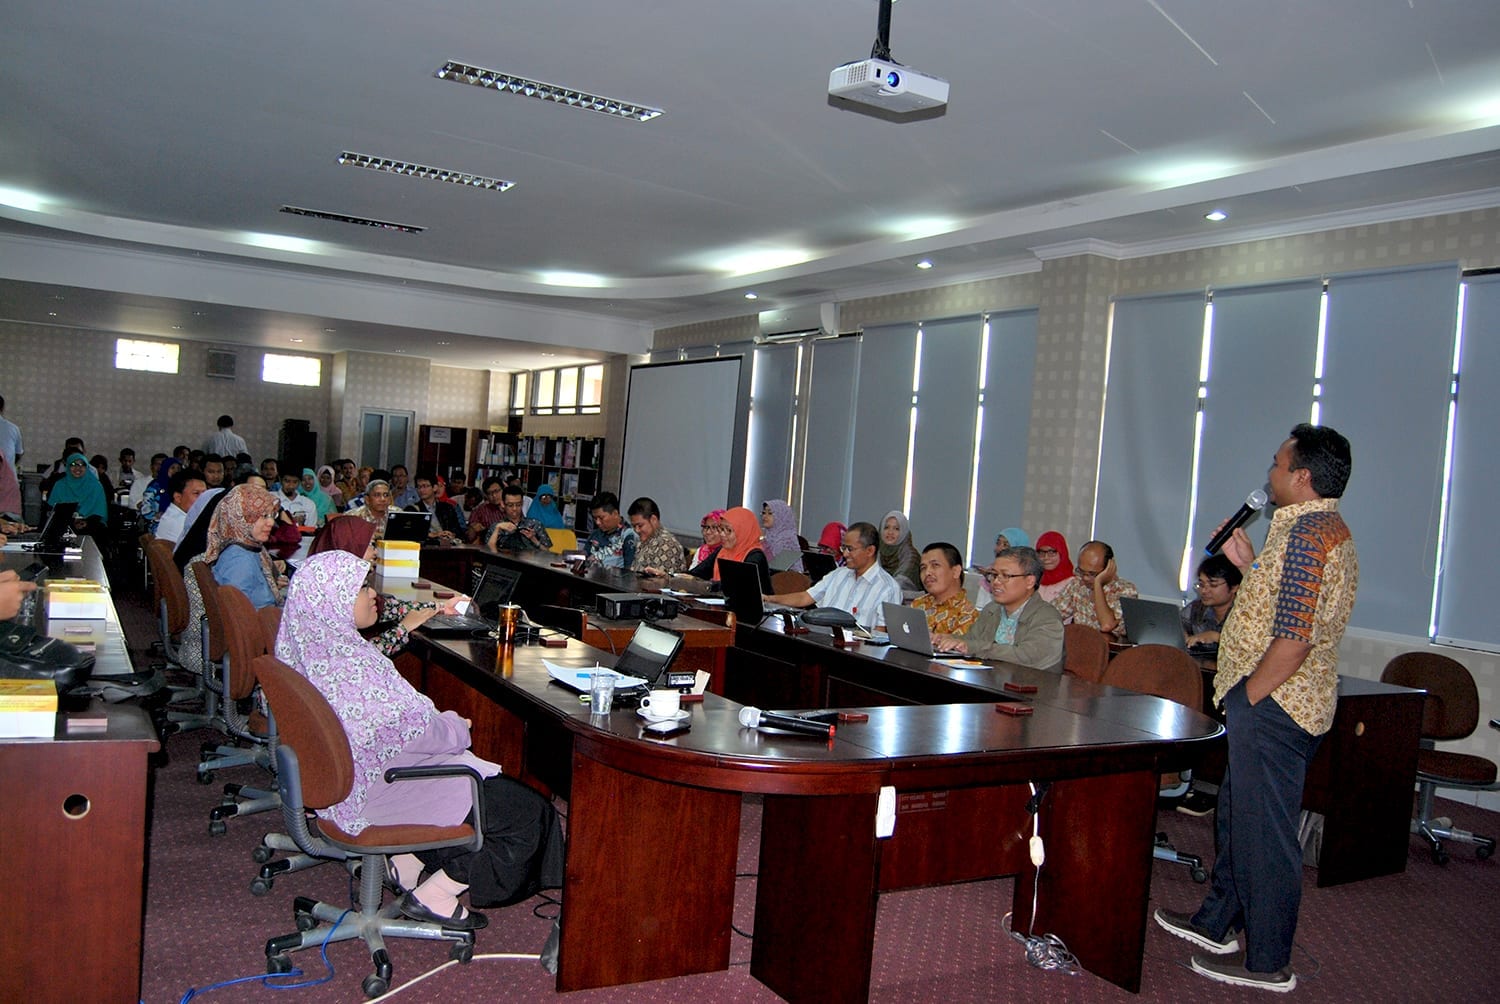 Gallery of Informatics Faculty Coordination Meeting of the 2015/2016 Even Semester